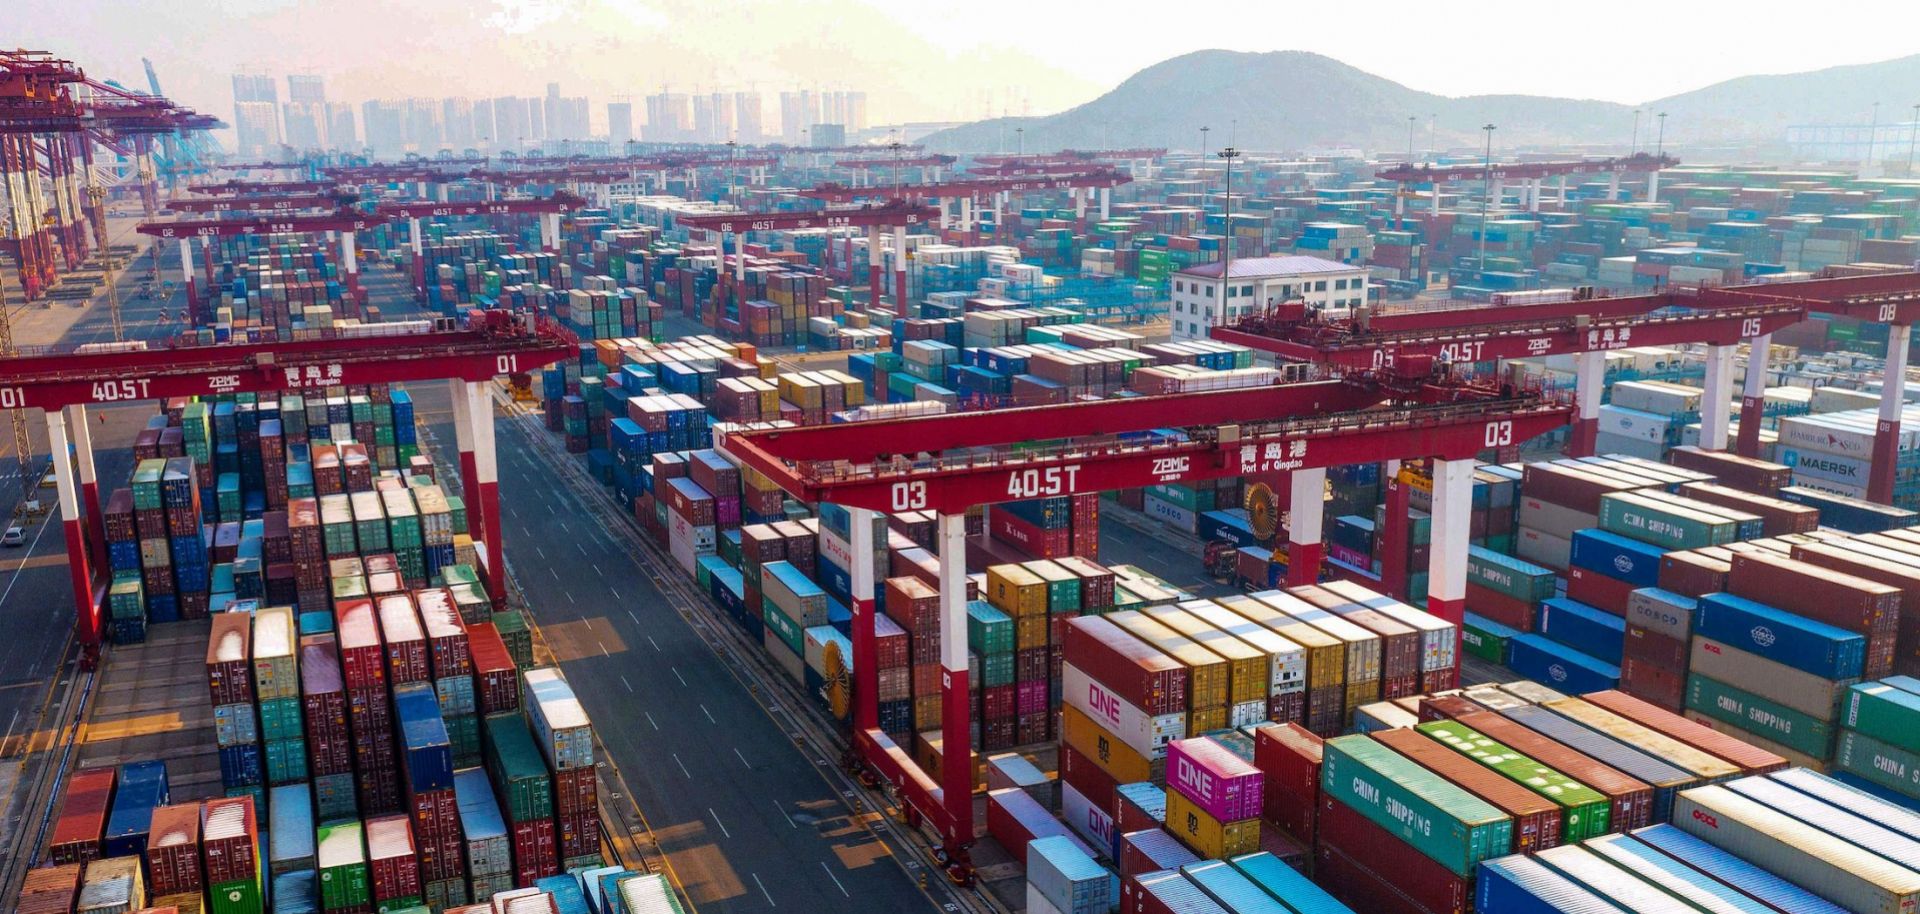 Containers are seen stacked at a port in Qingdao, China, on Jan. 14, 2020. 